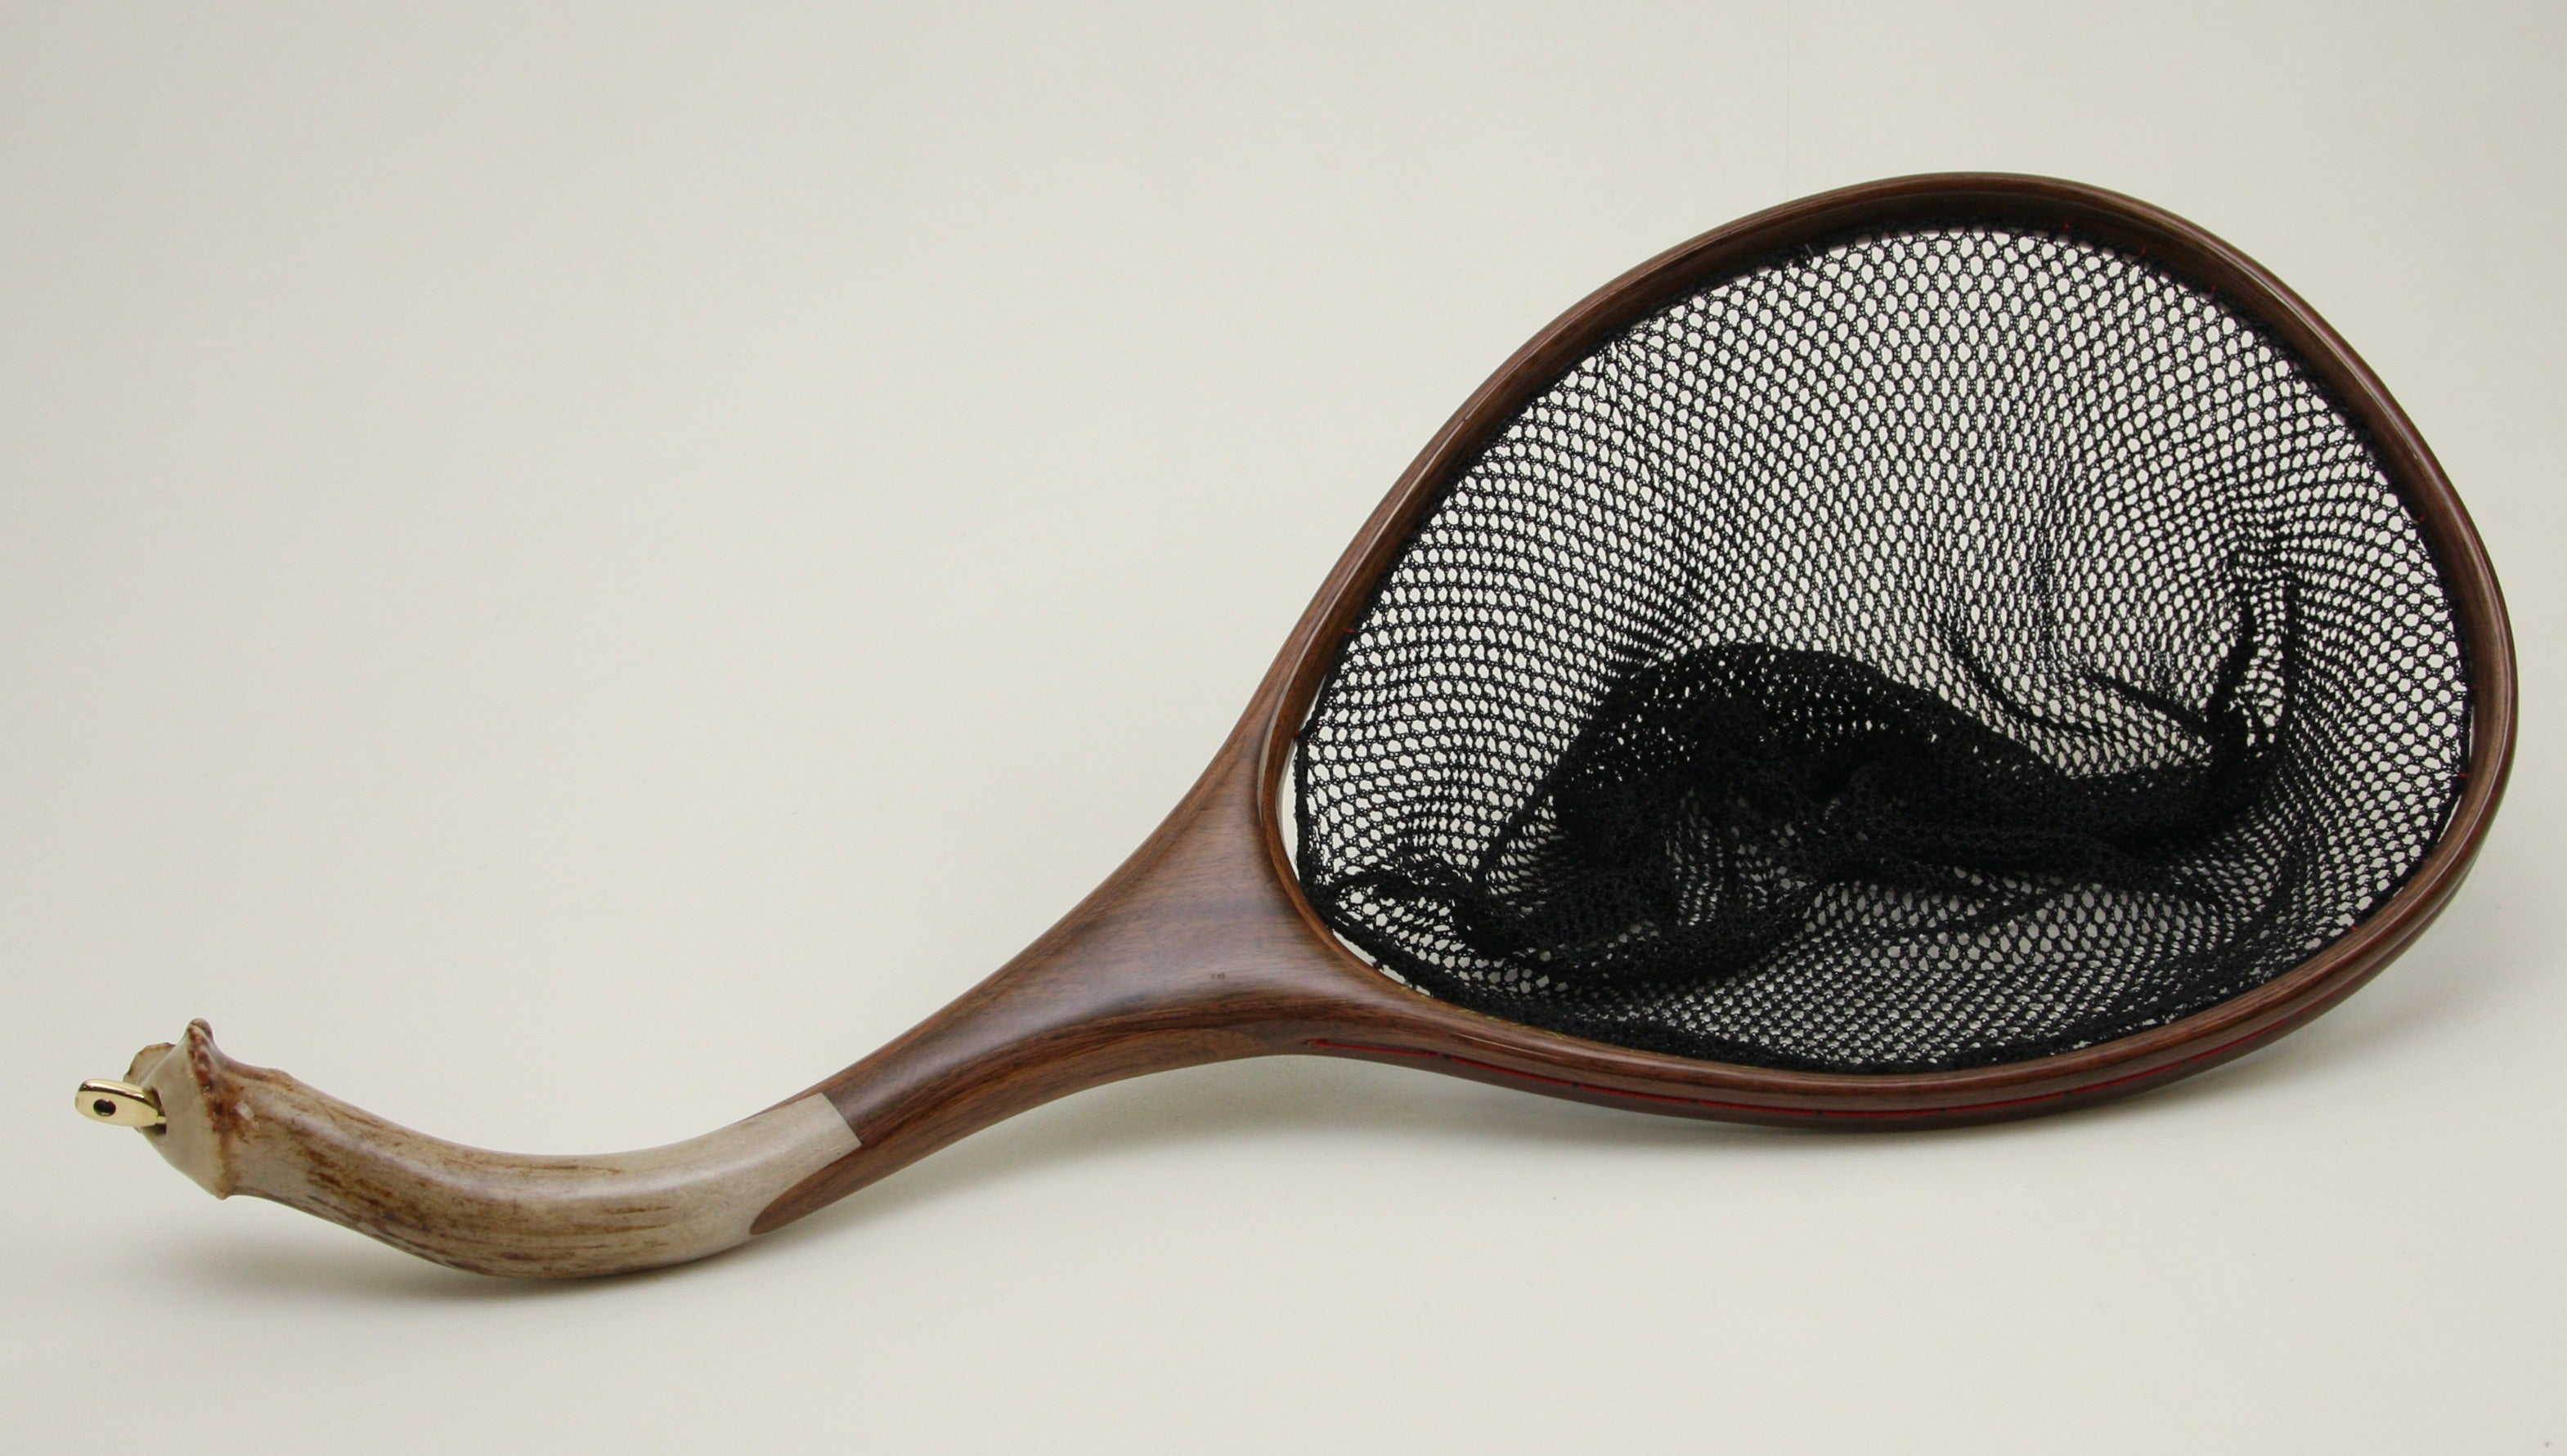 Medium sized Fly Fishing Landing Net with Deer Antler and Walnut